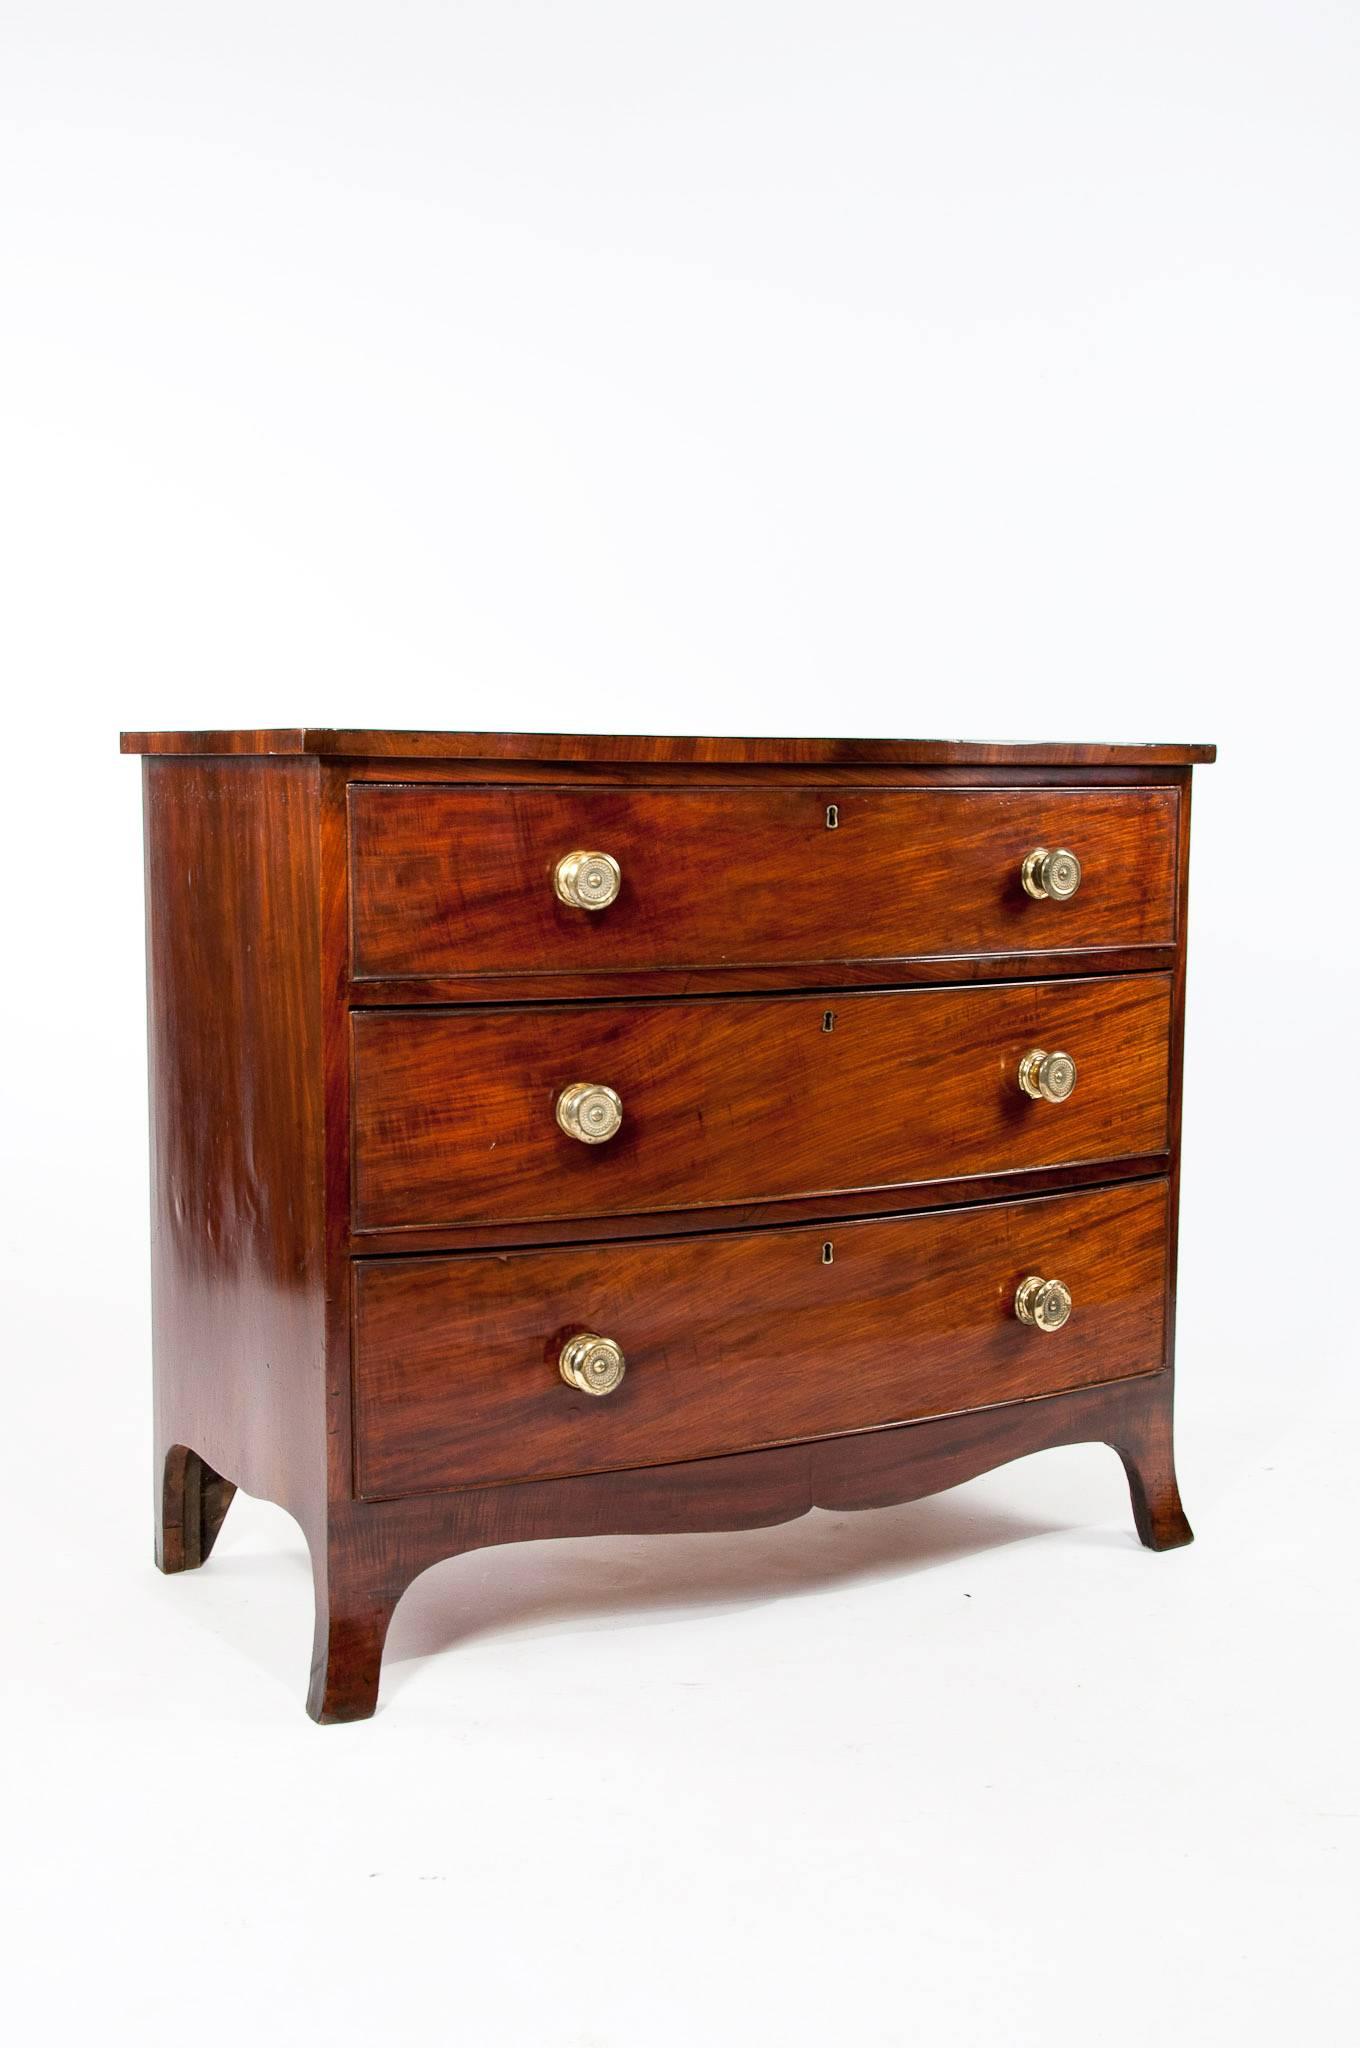 English George III Mahogany Bow Chest of Drawers